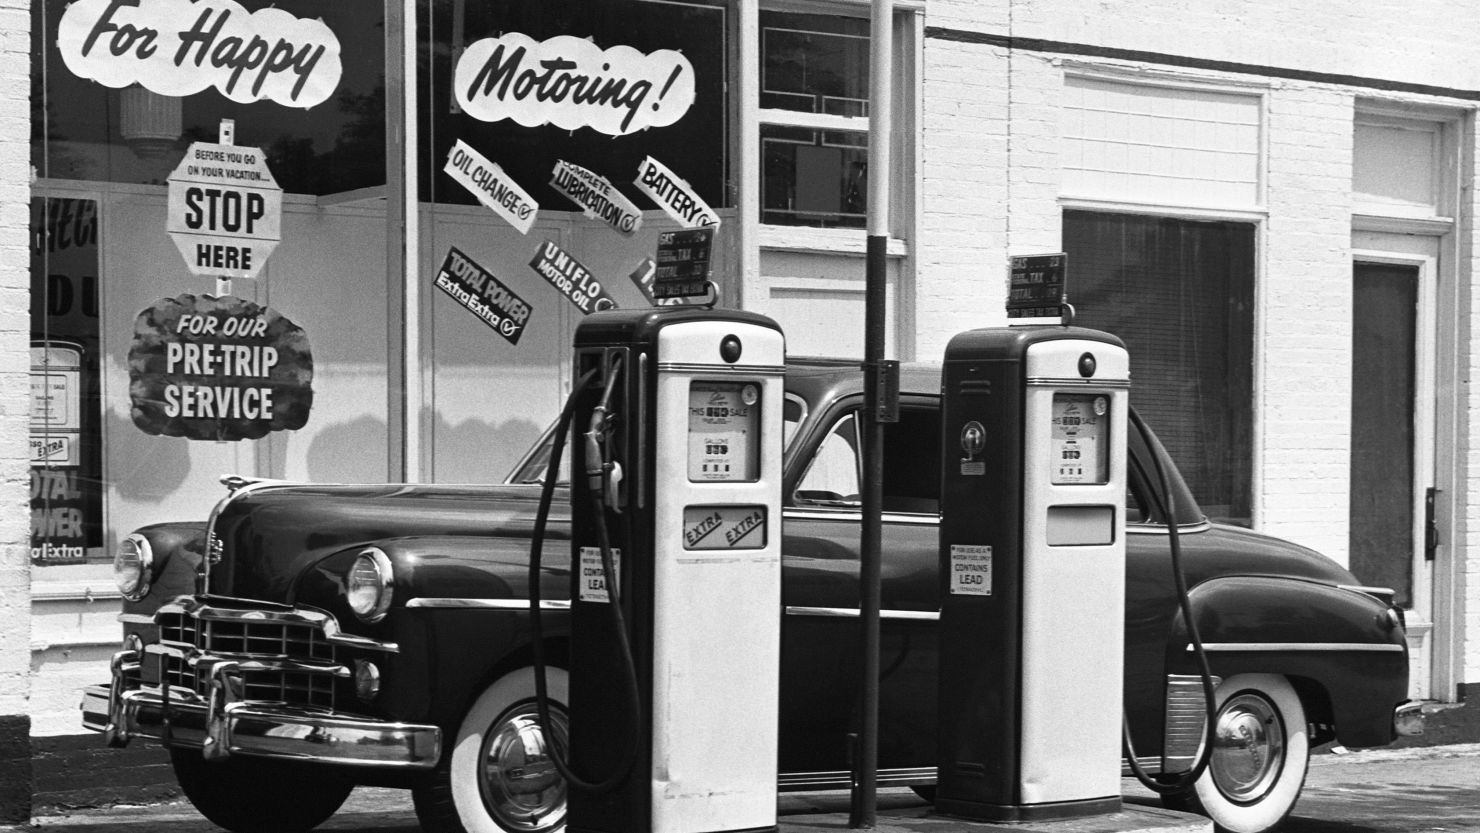 A gallon of gasoline cost around 27 cents in 1950.